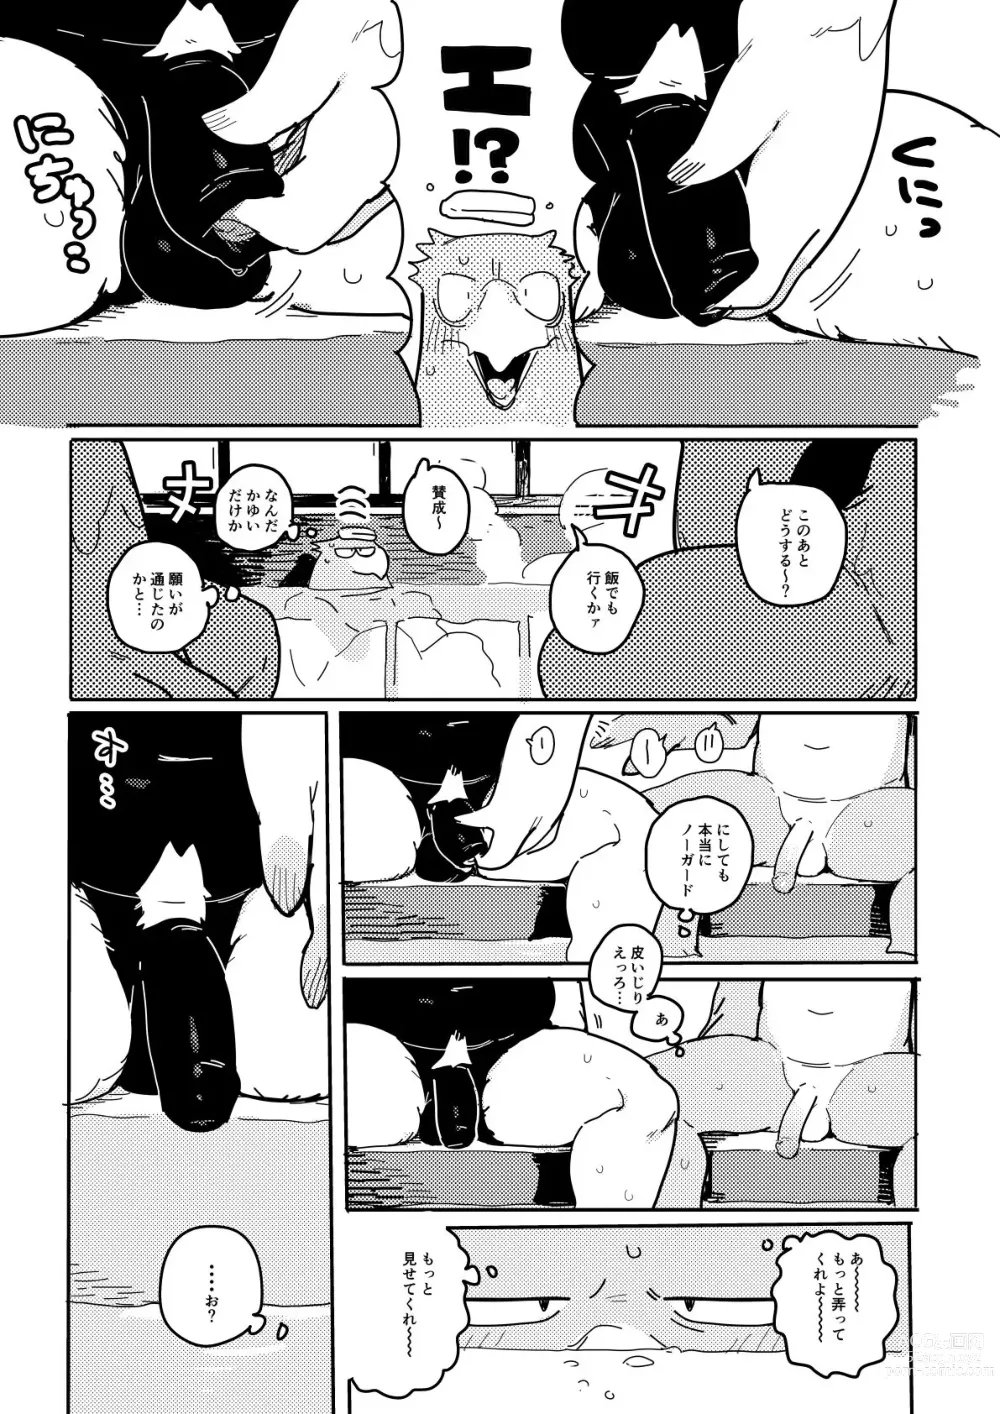 Page 3 of doujinshi - BIRD IN SPA!